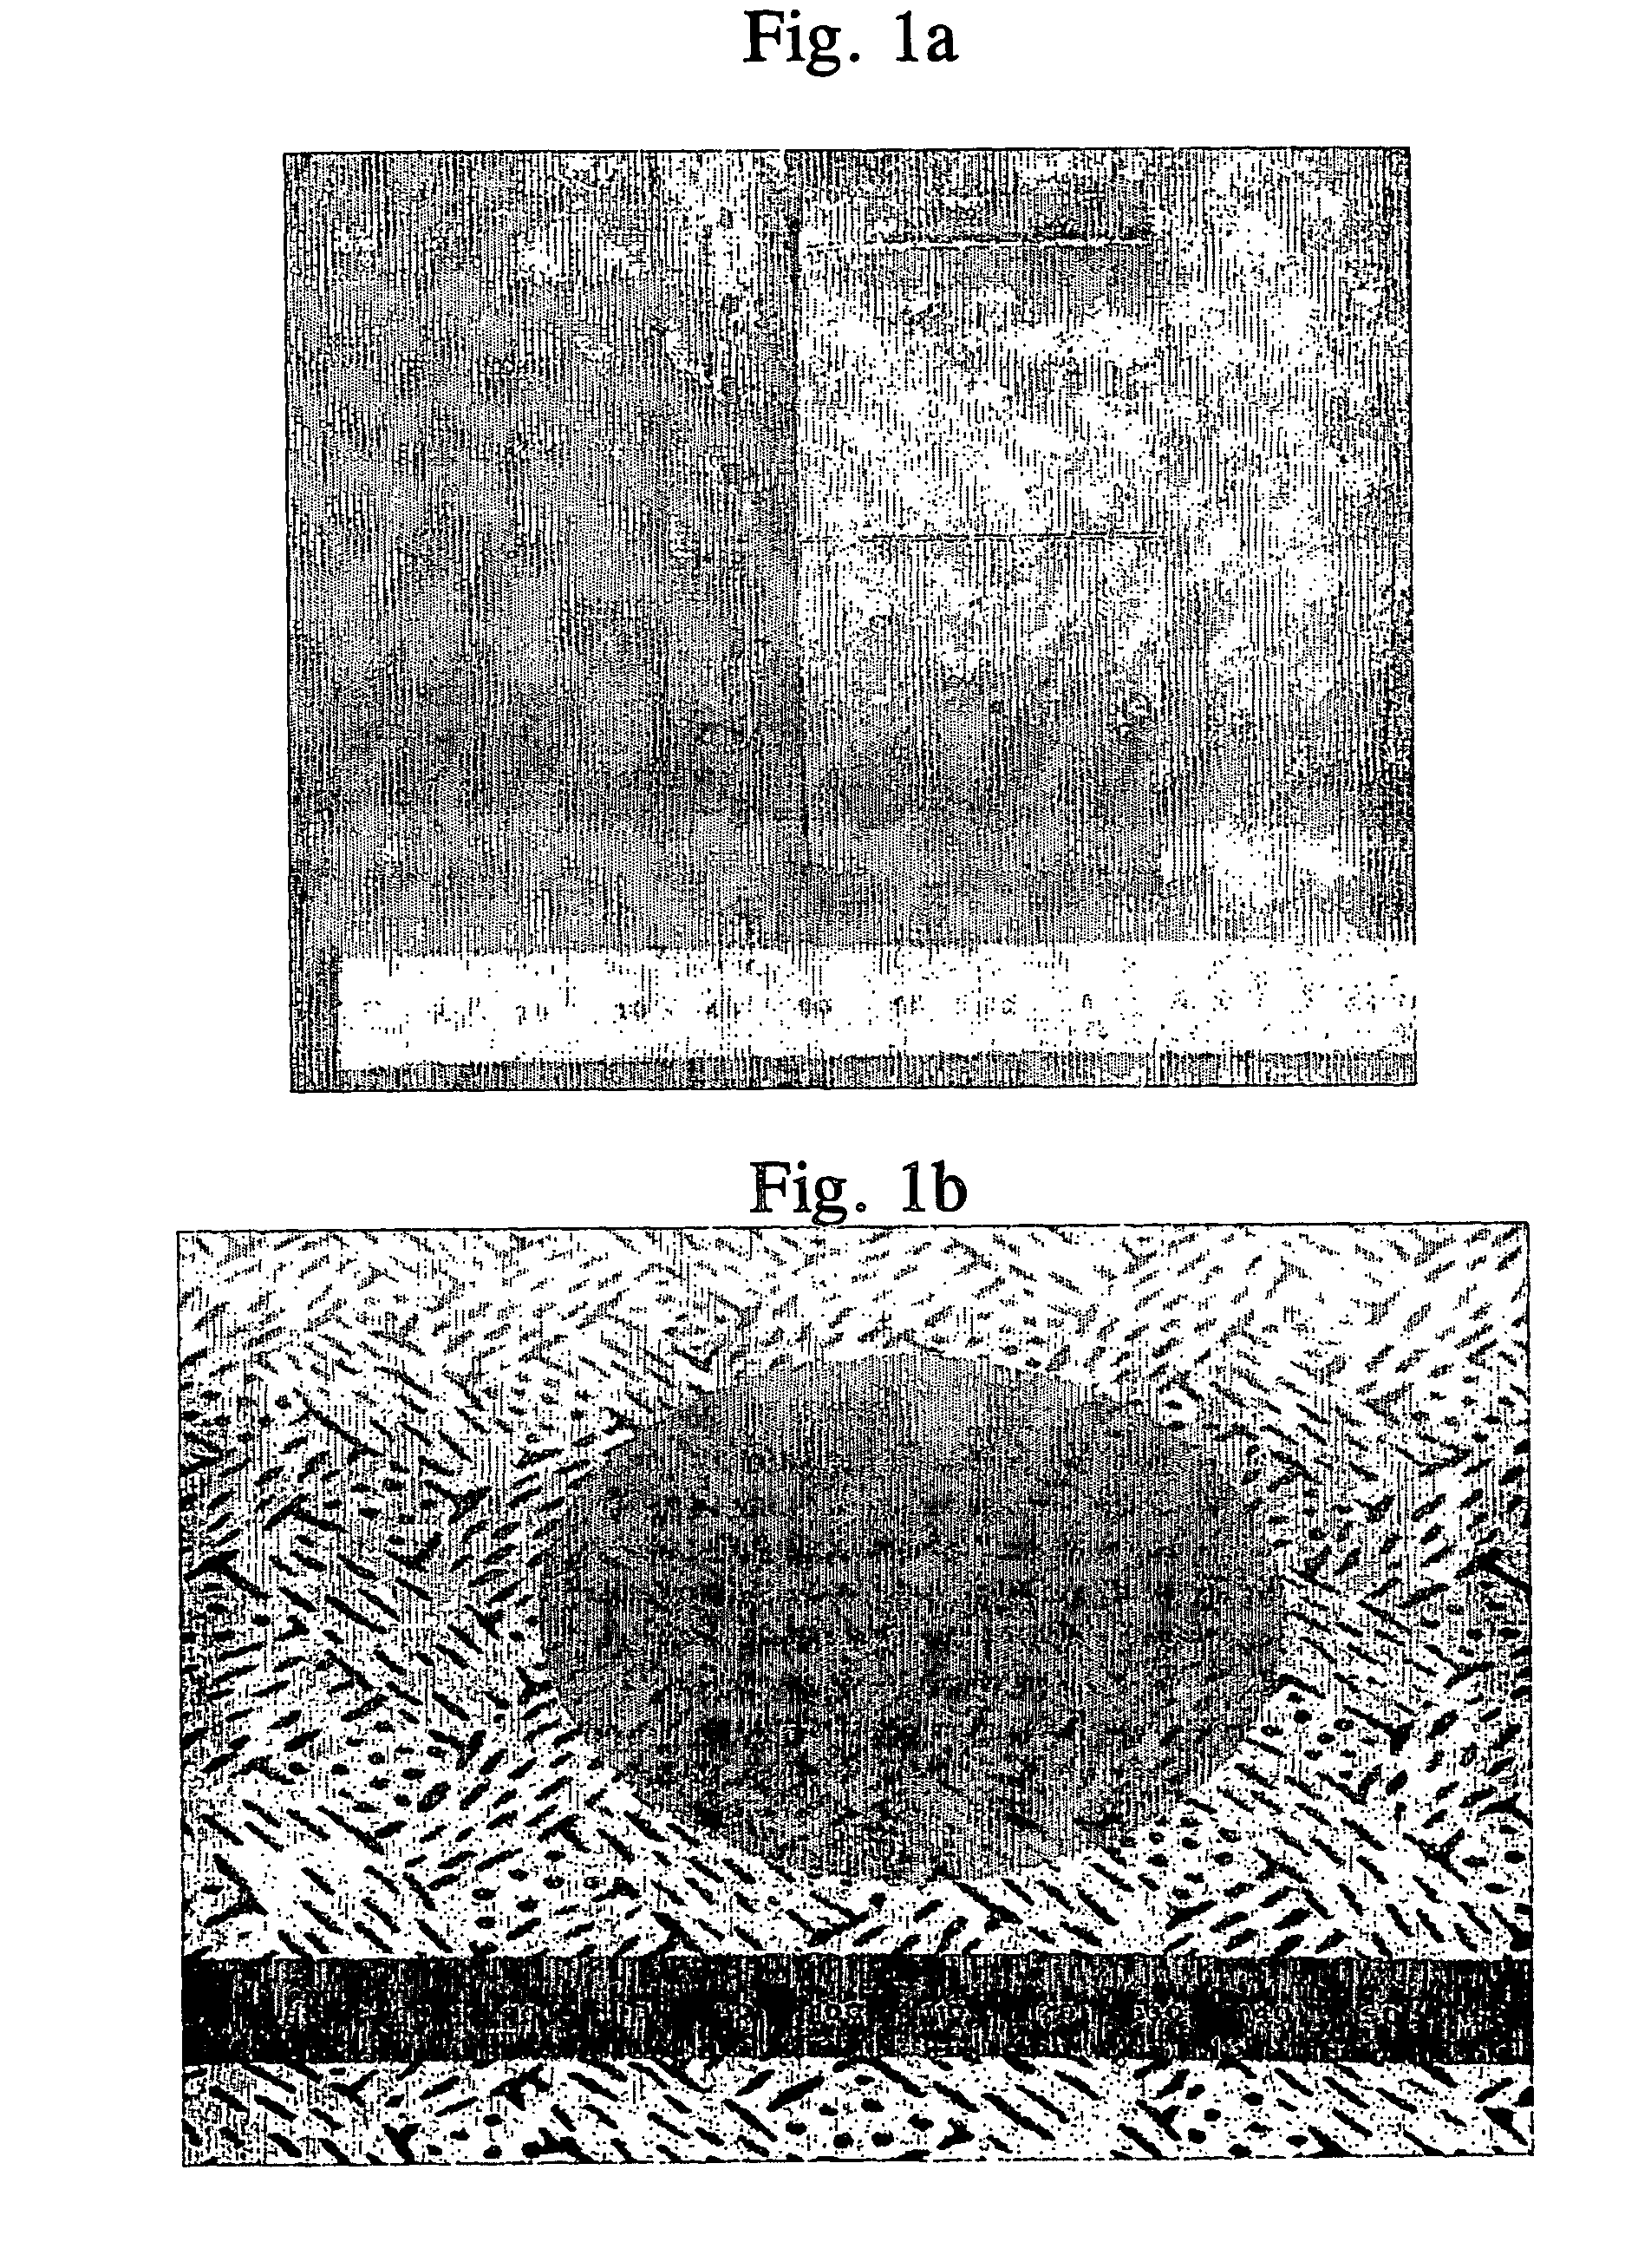 Ferroelectric ceramic compound, a ferroelectric ceramic single crystal, and preparation processes thereof